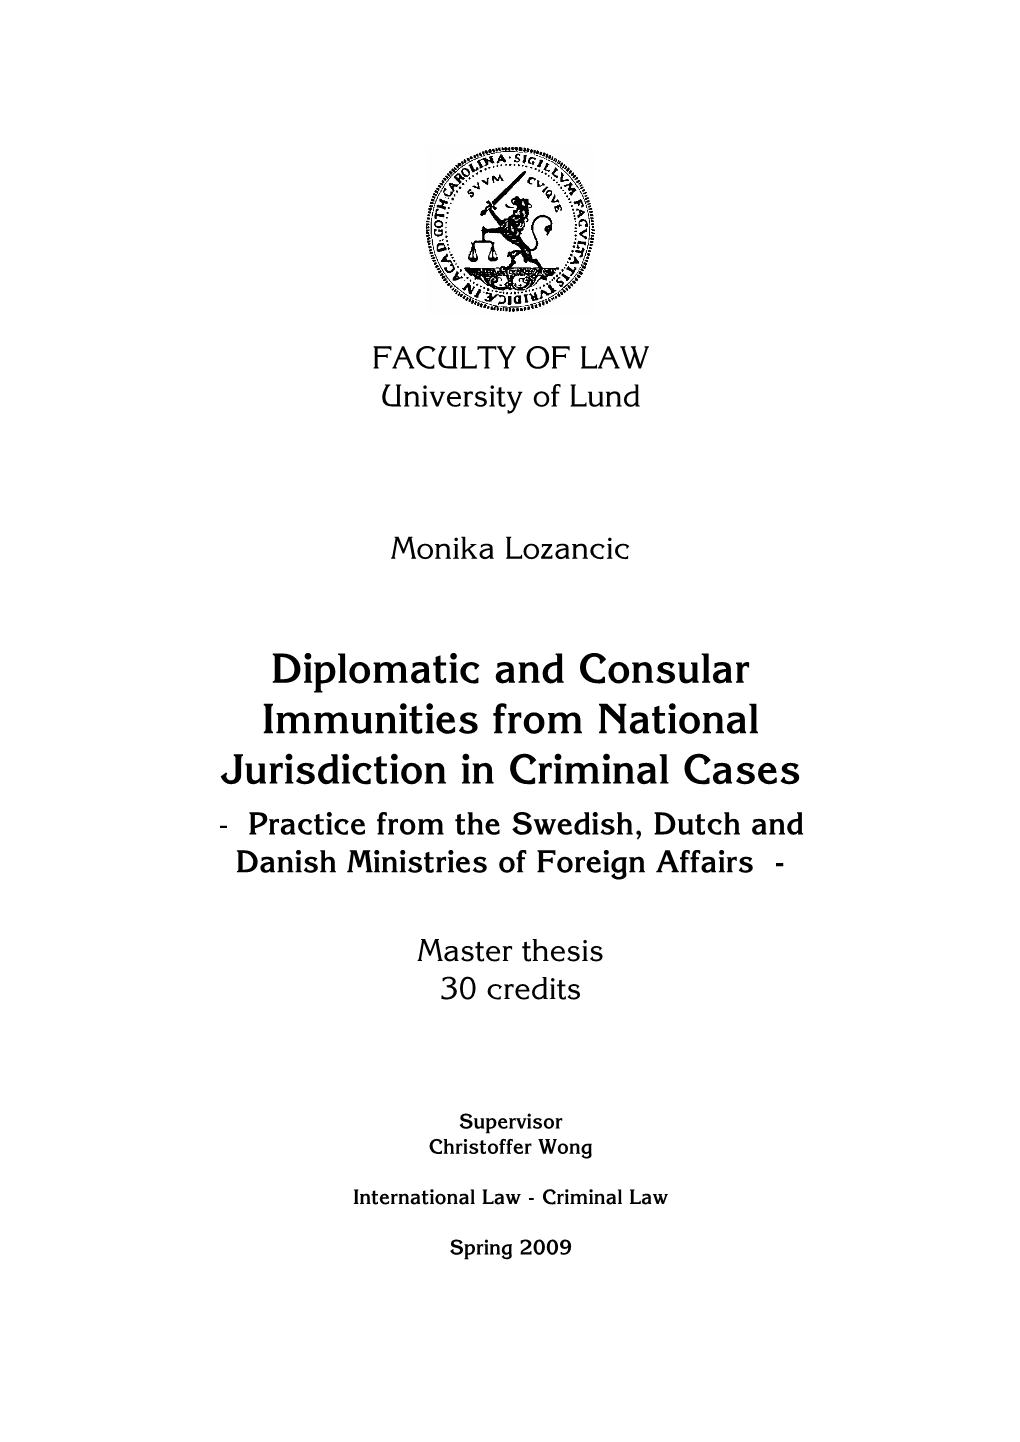 Diplomatic and Consular Immunities from National Jurisdiction in Criminal Cases - Practice from the Swedish, Dutch and Danish Ministries of Foreign Affairs